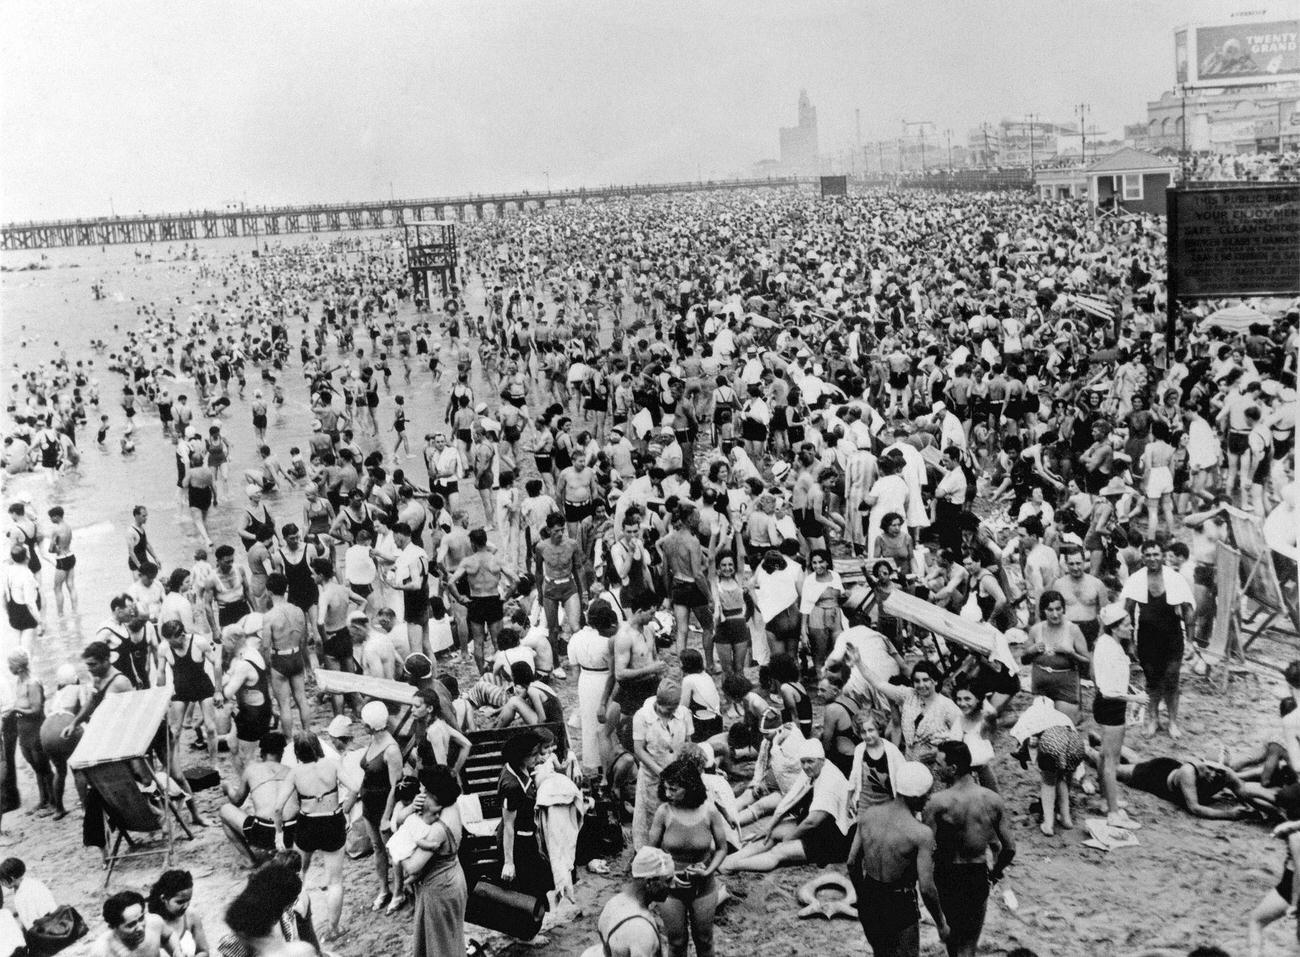 Crowded Coney Island Beach Refreshes Boaters, April 8, 1939